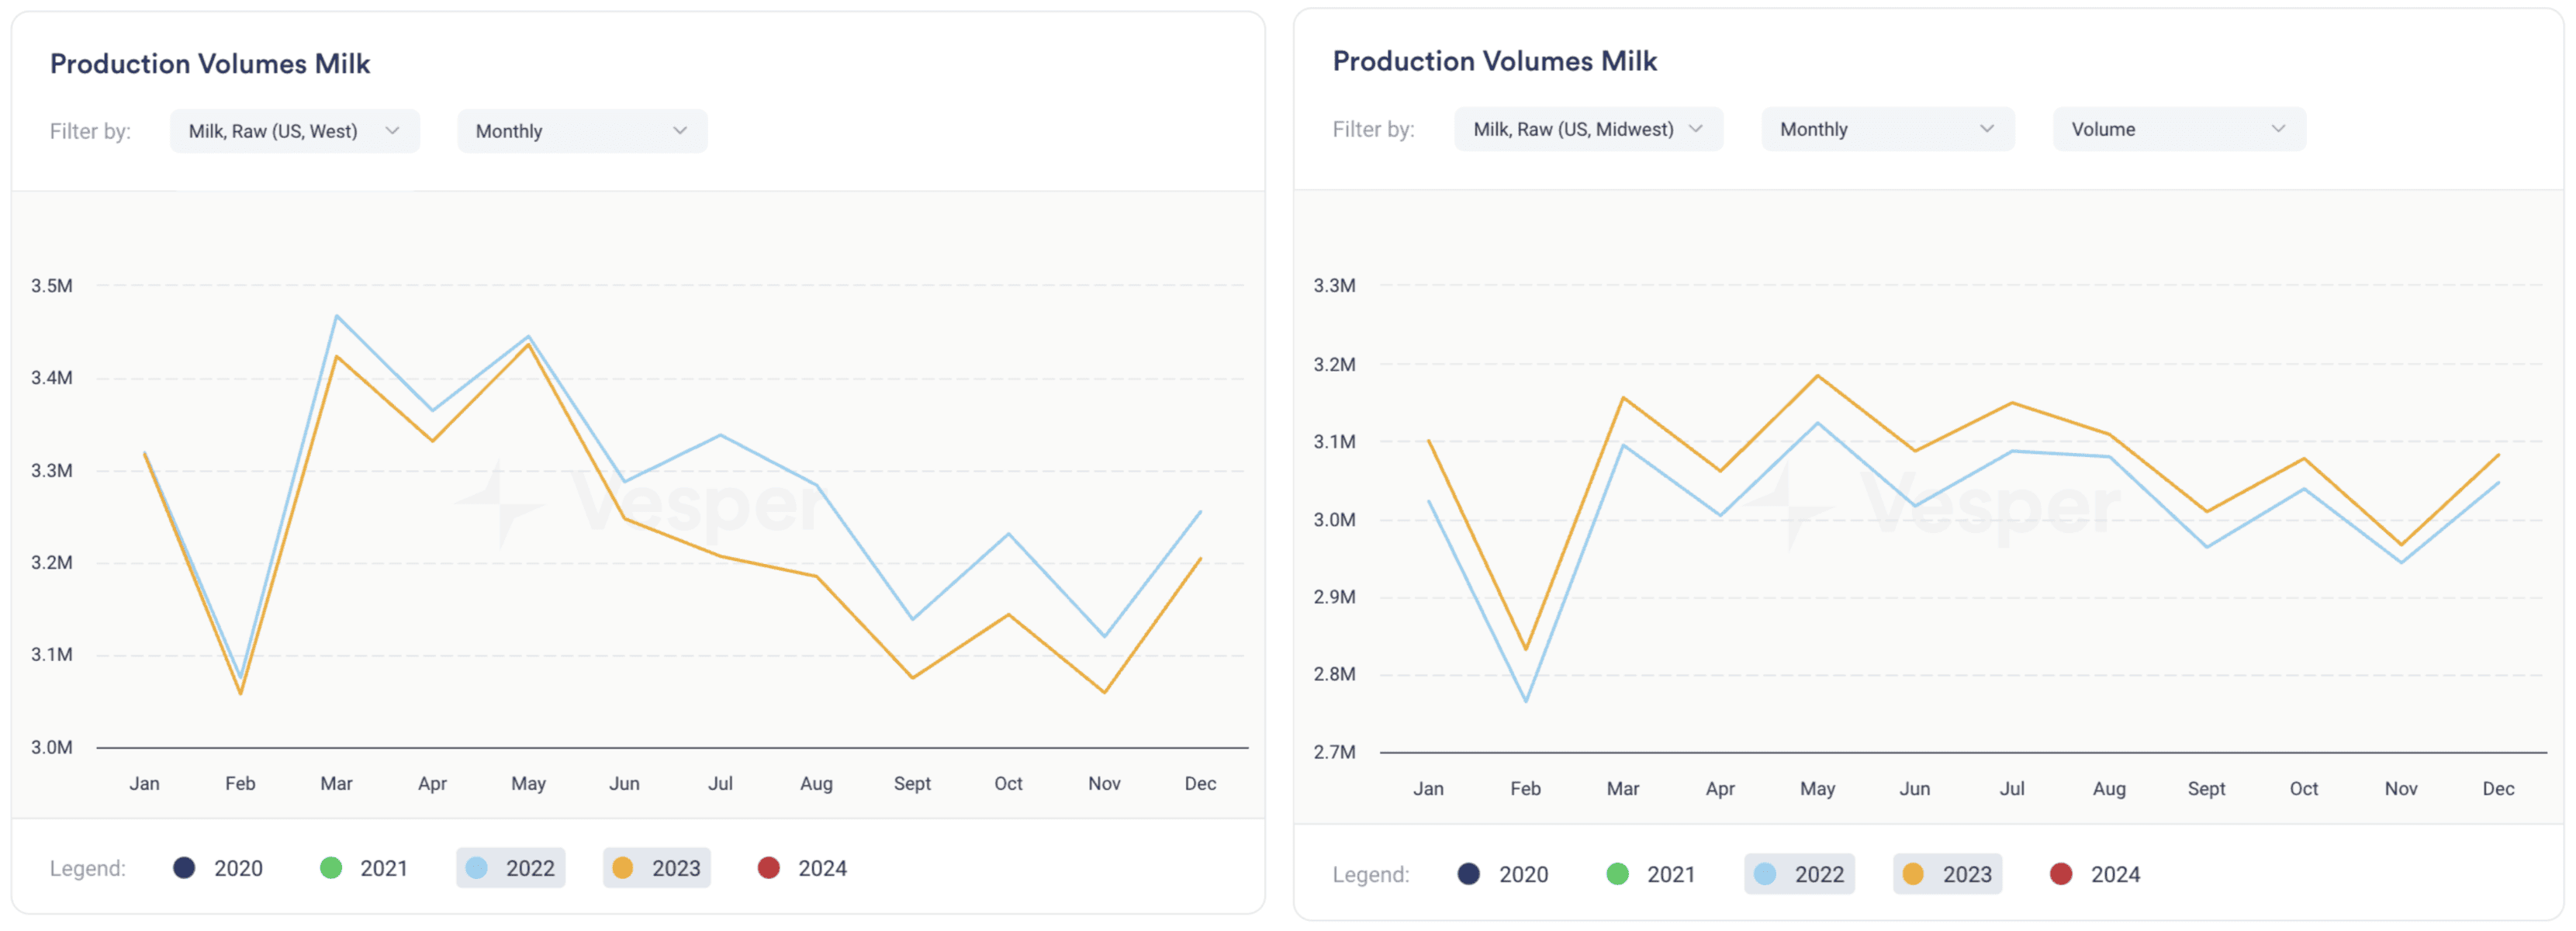 monthly milk production of the US West and Midwest in MT